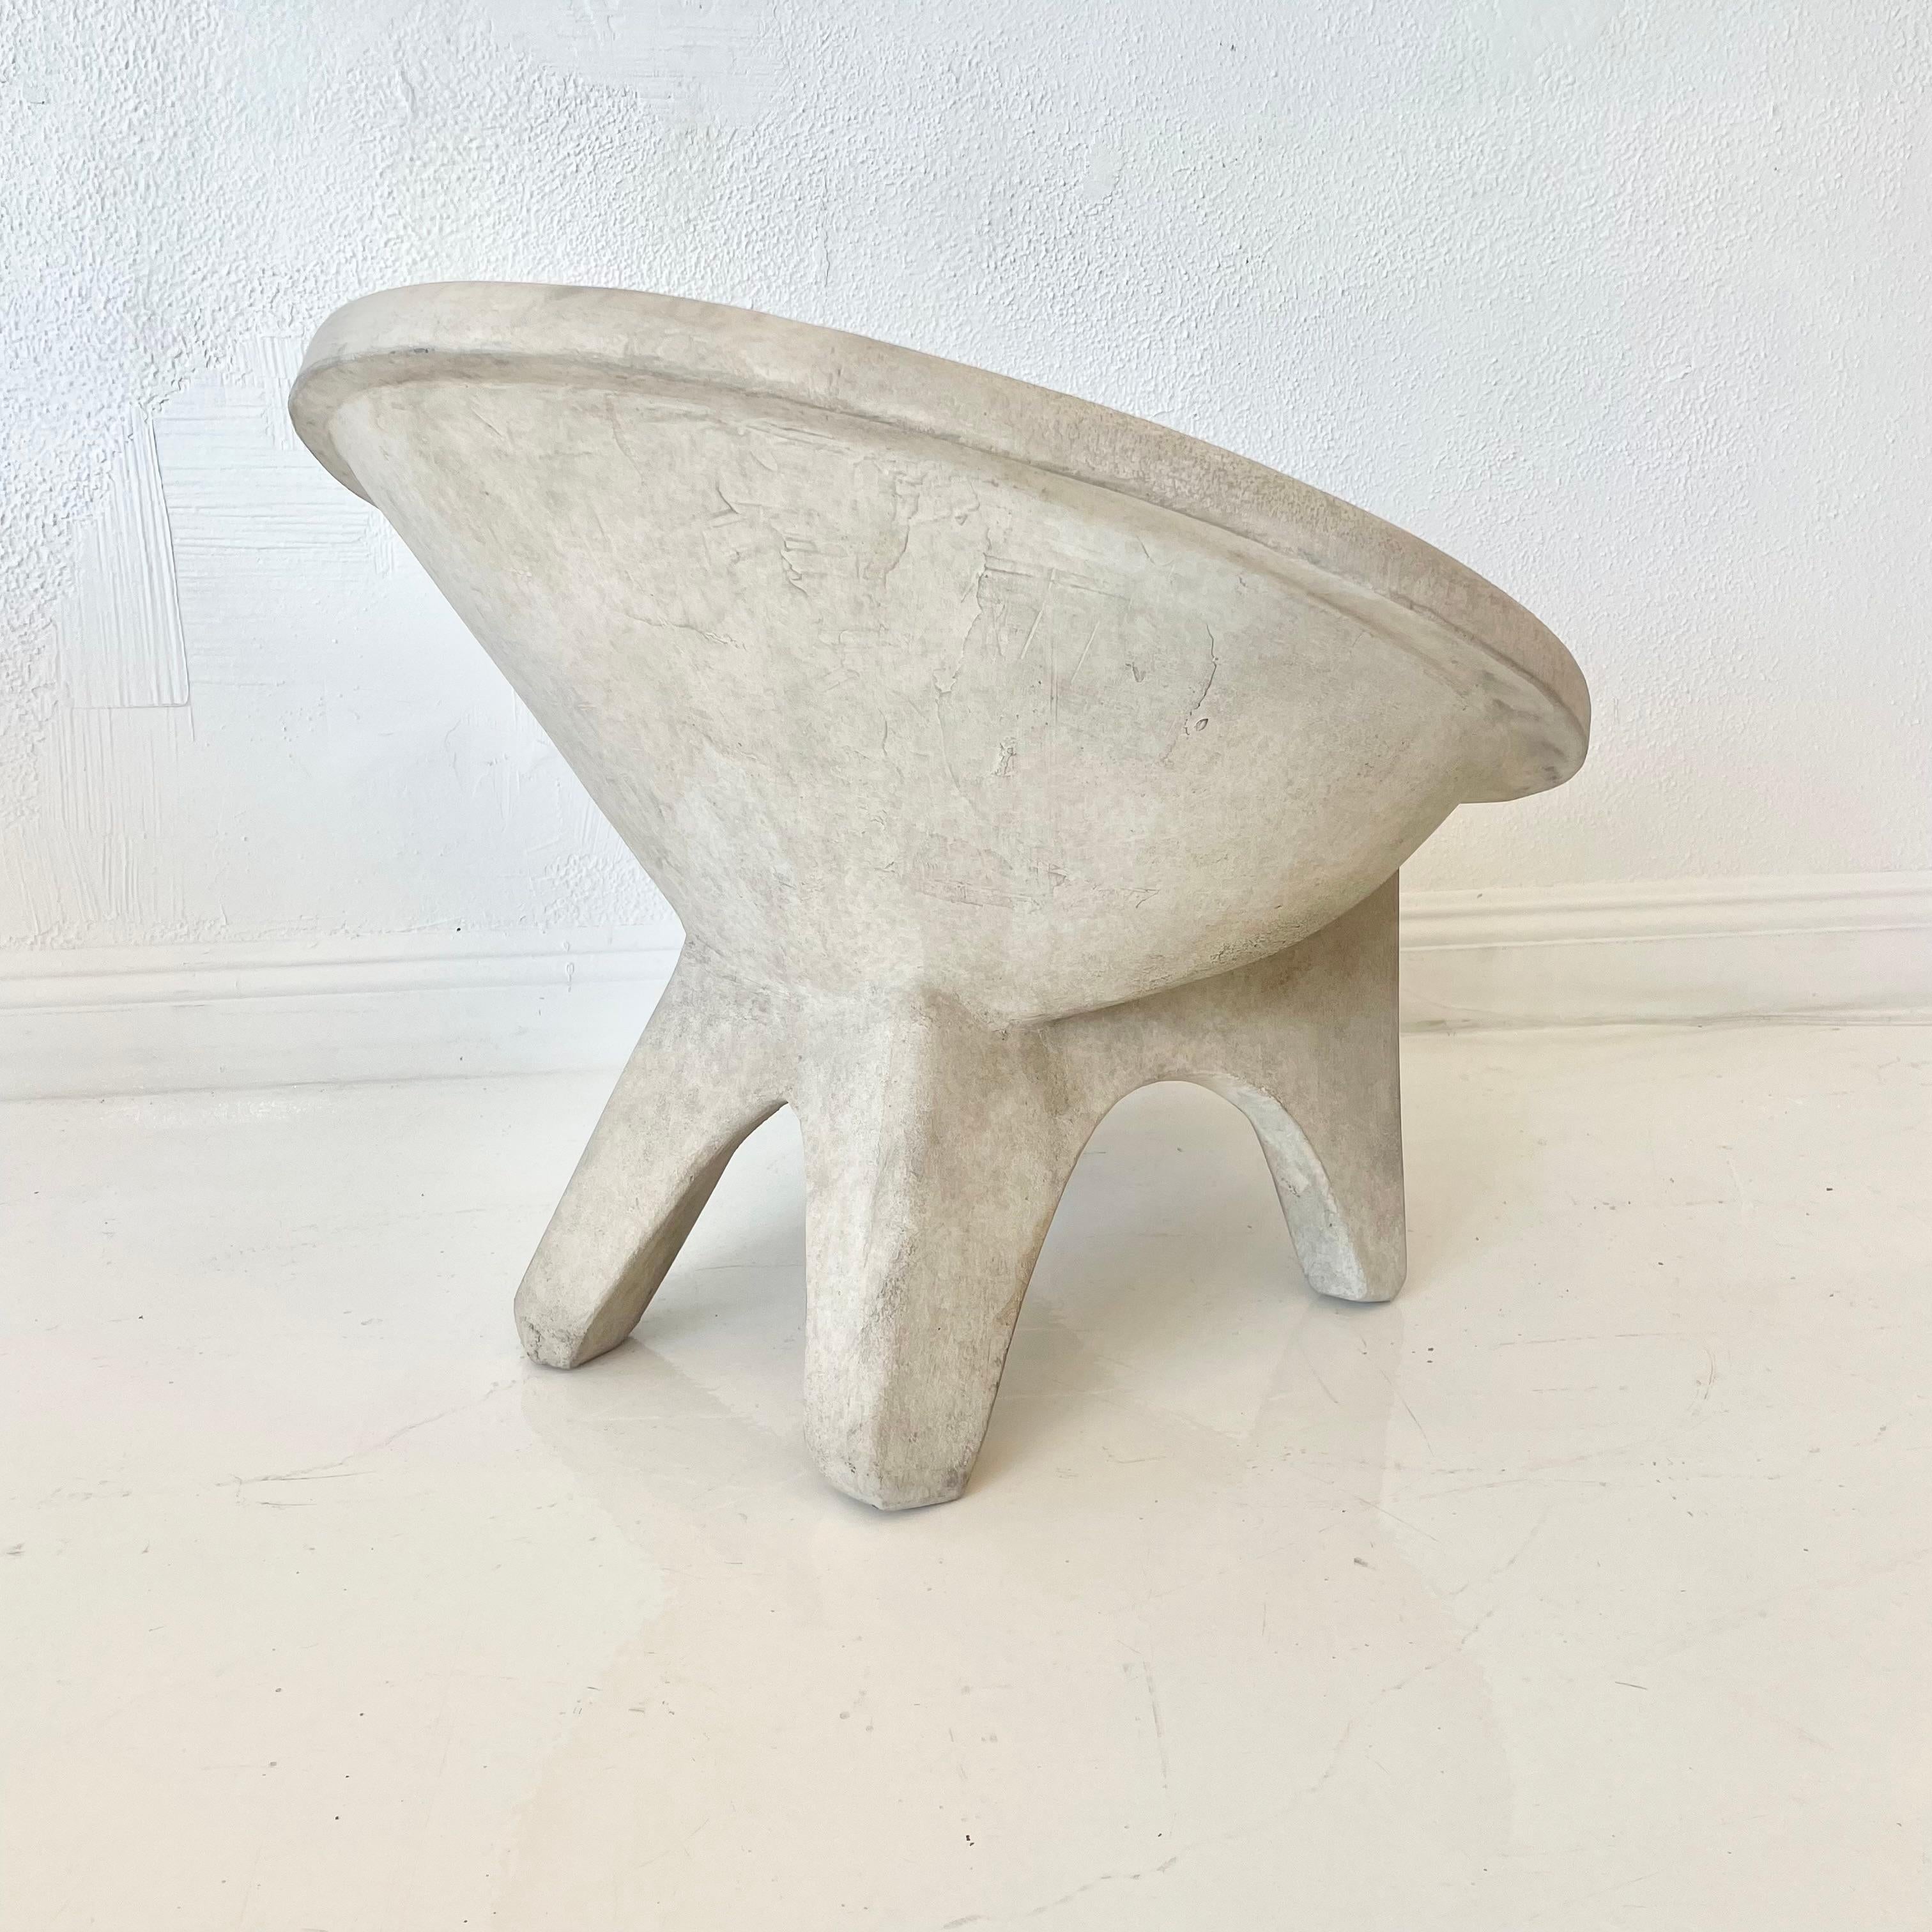 Hand-Crafted Sculptural Concrete Chair by Merit, Los Angeles For Sale